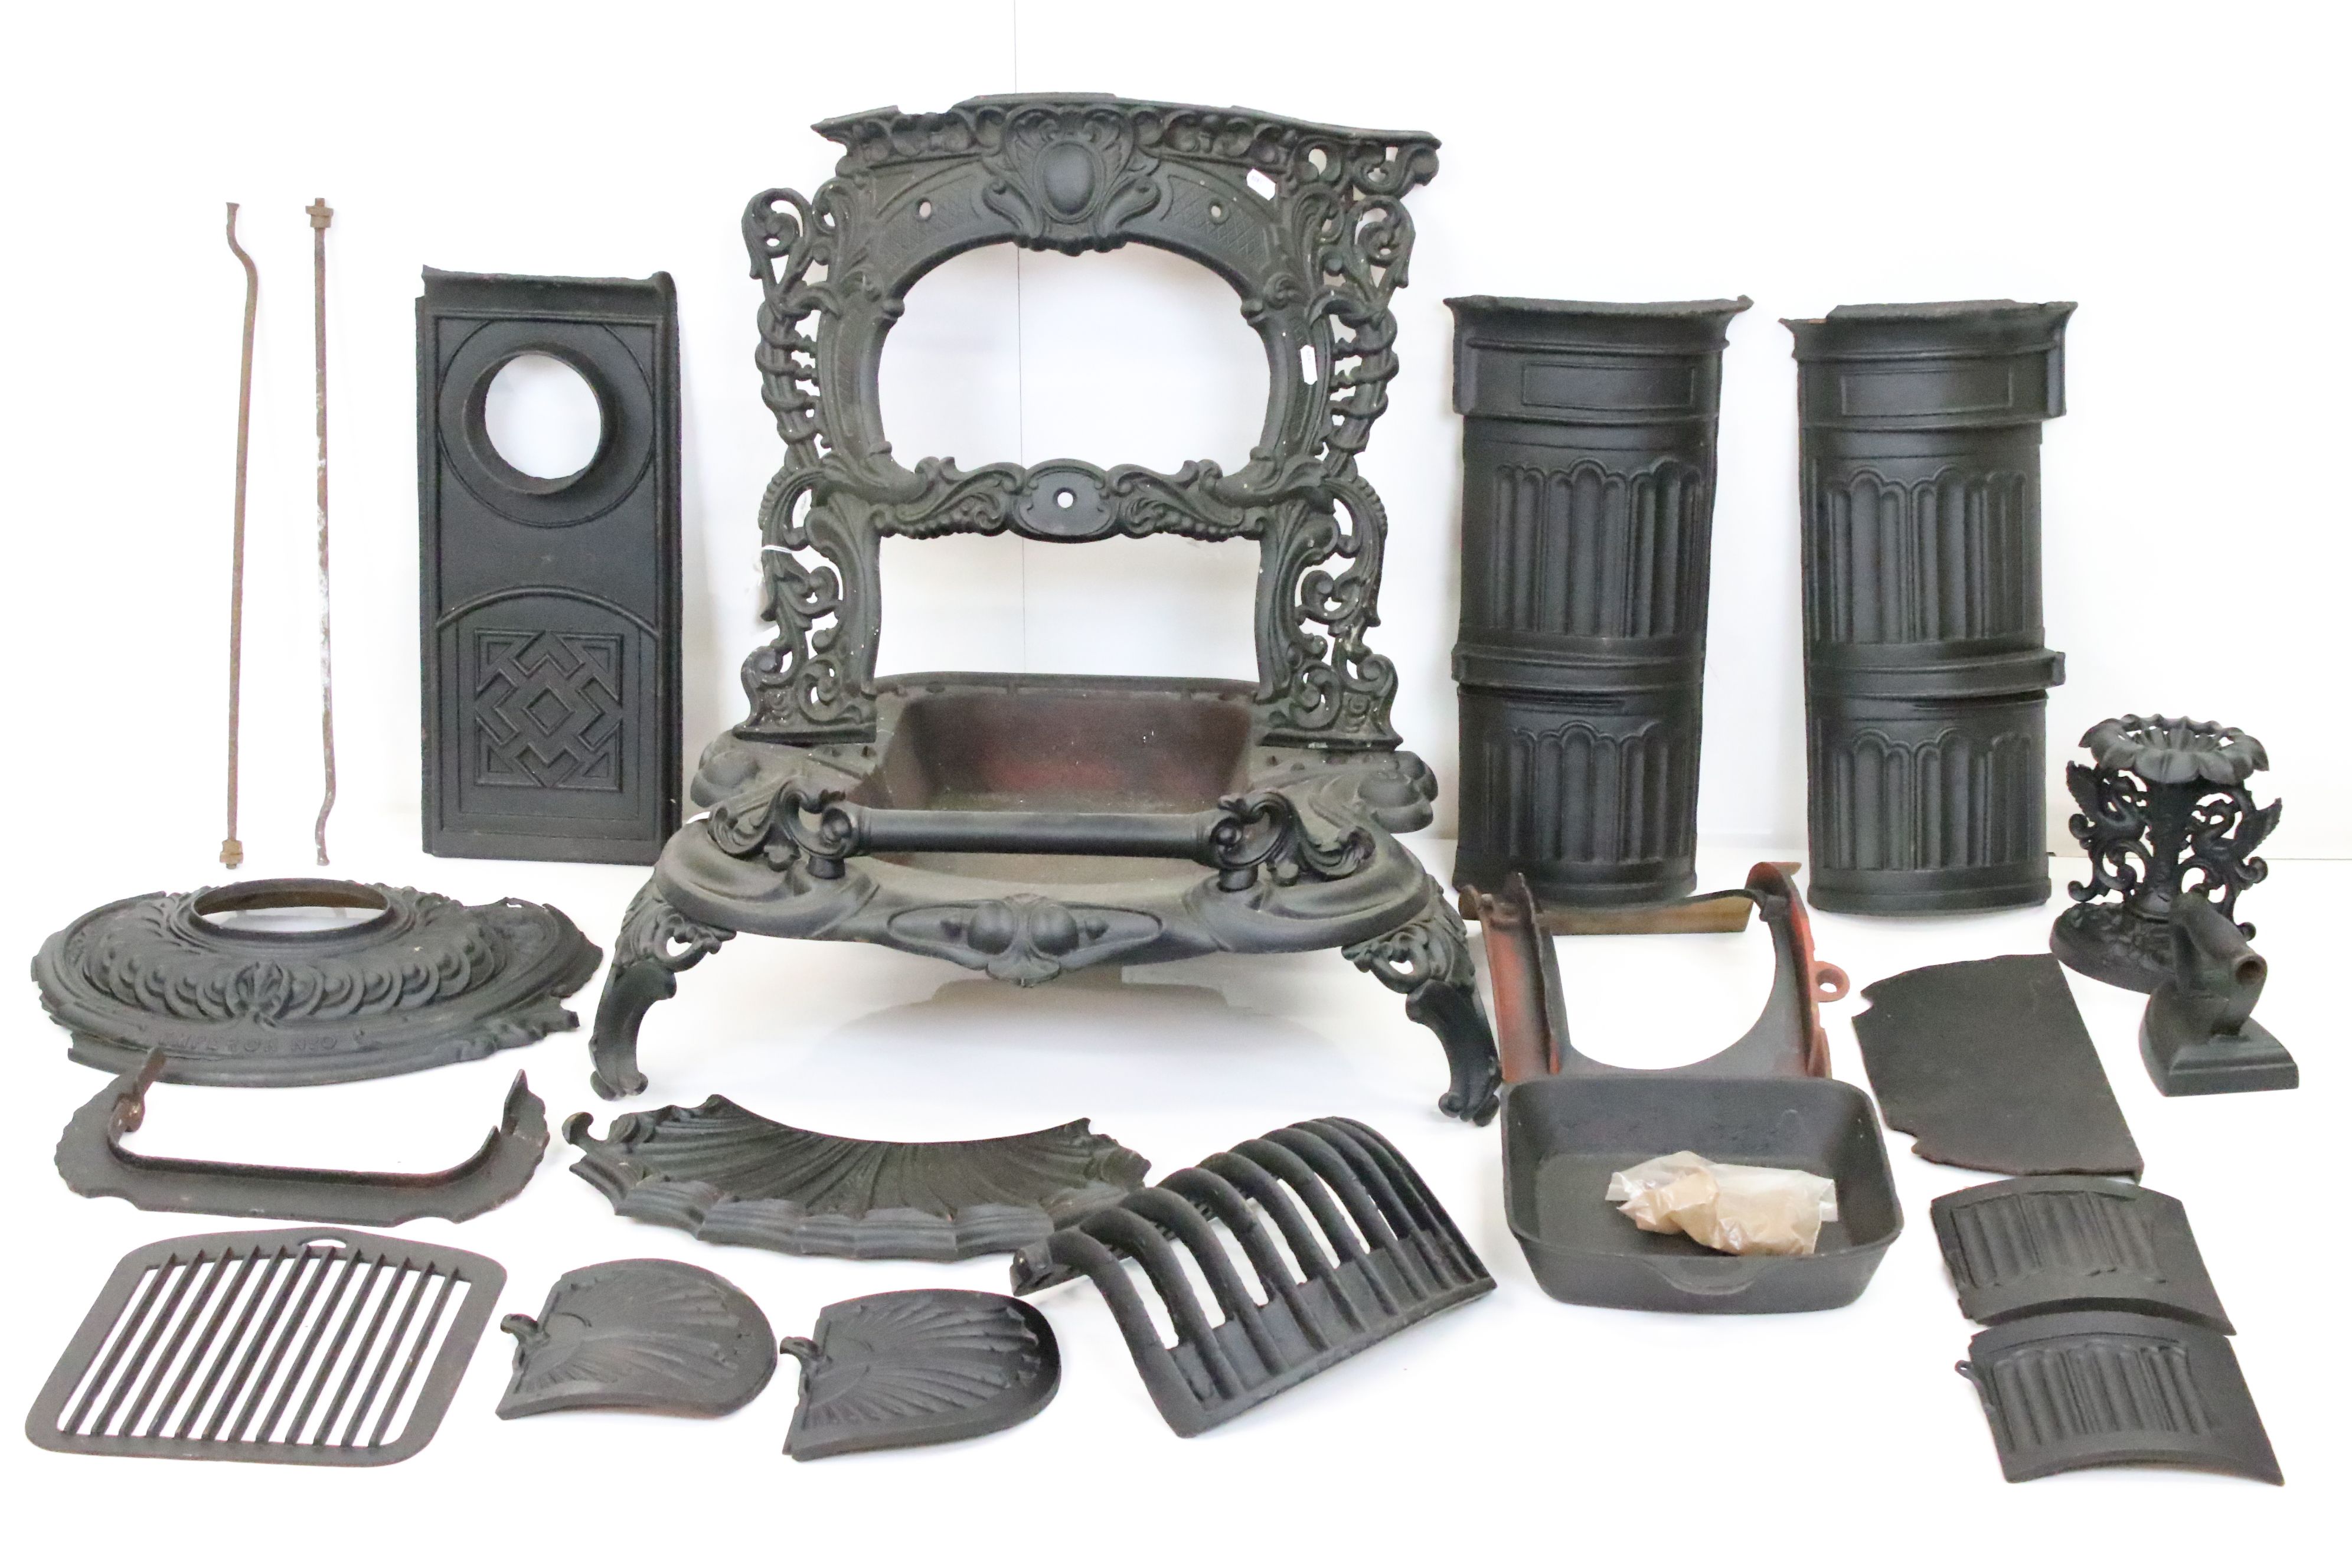 Collection of Reproduction Victorian Metal Fire Grates and accessories